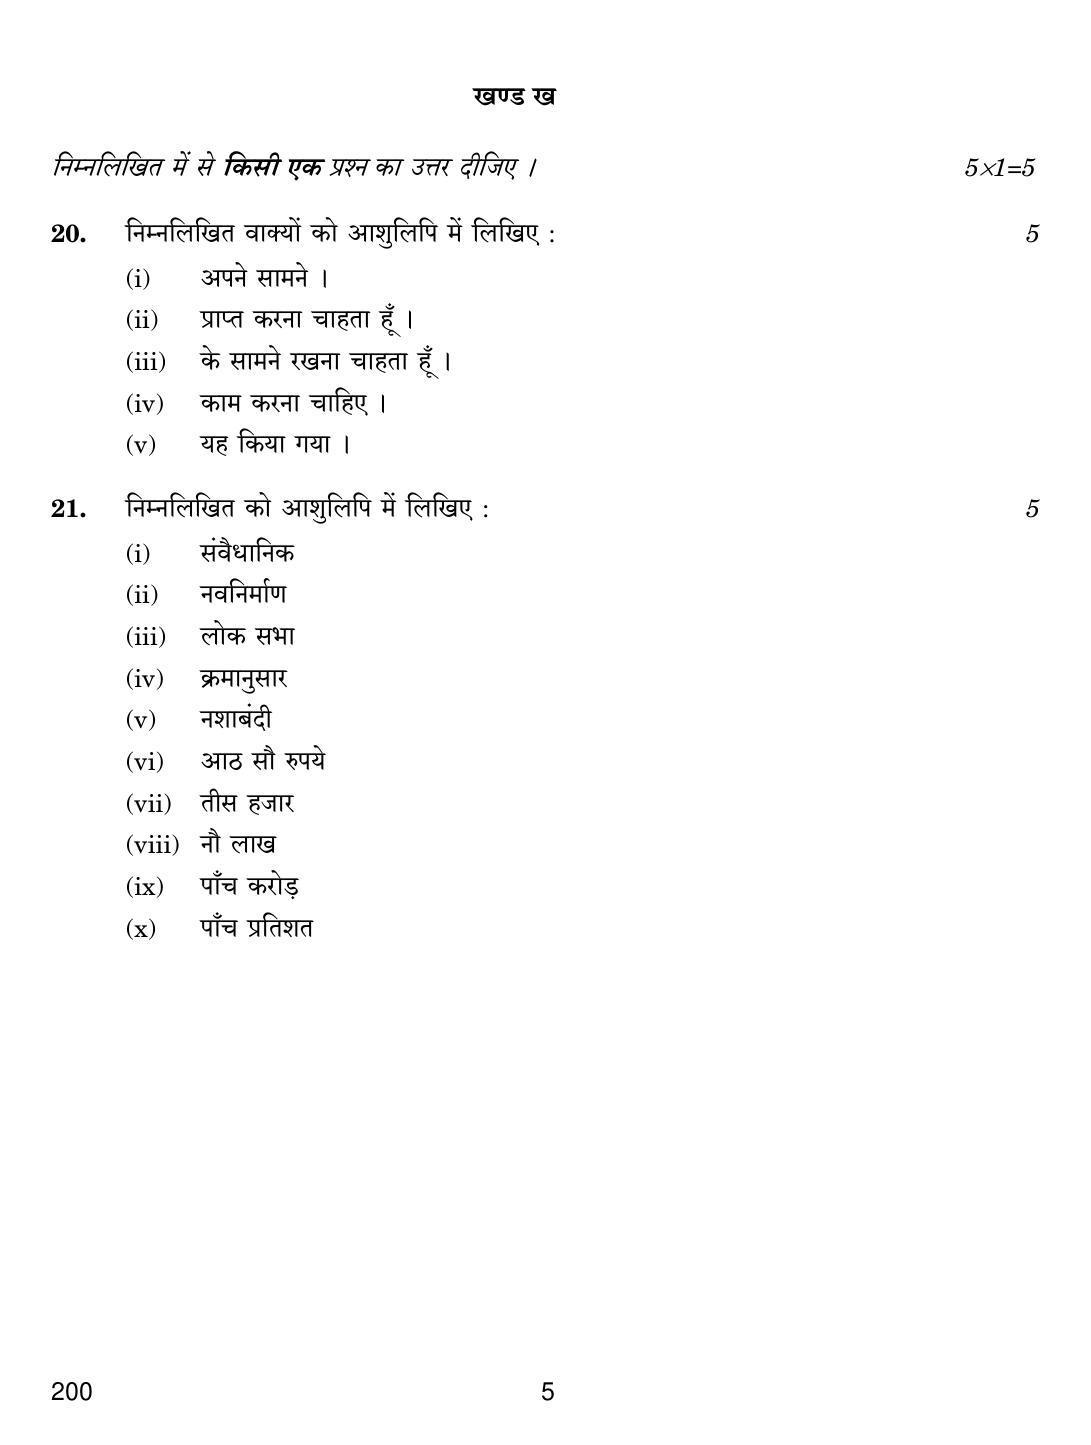 CBSE Class 12 200 SHORTHAND HINDI 2019 Compartment Question Paper - Page 5